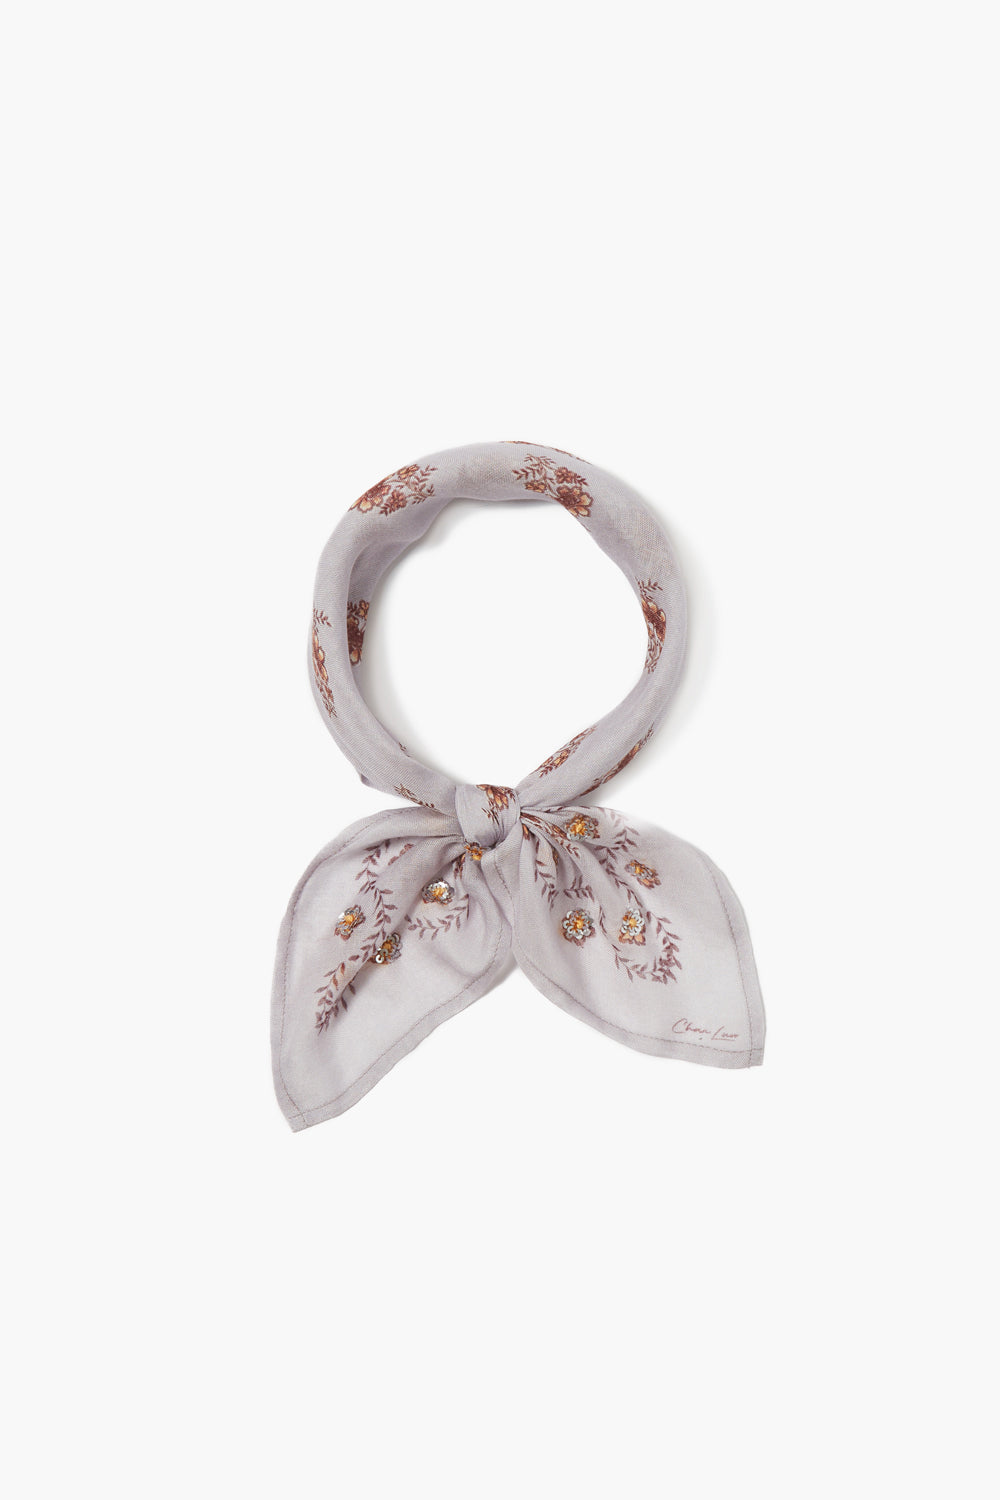 SEQUIN BANDANA - ORCHID HUSH - Kingfisher Road - Online Boutique